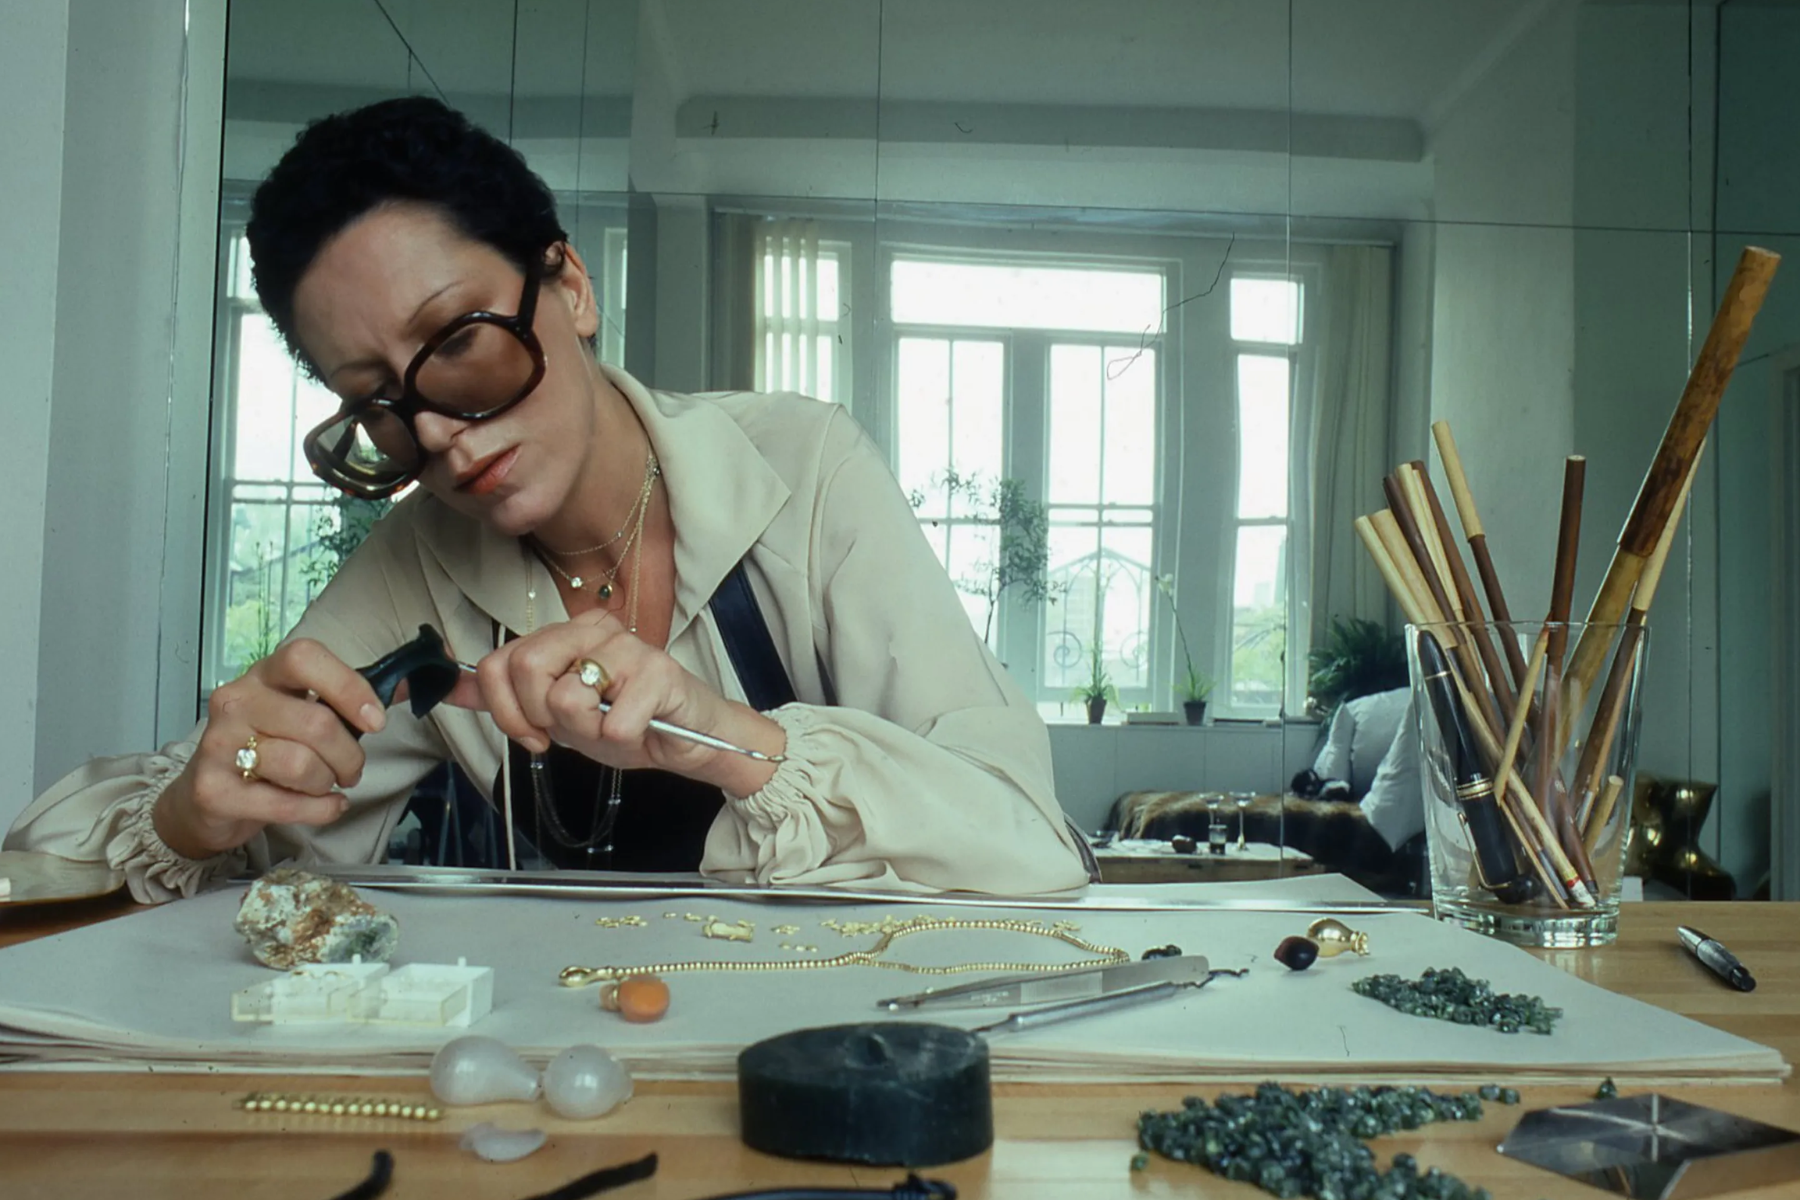 A woman vintage designer on her working table